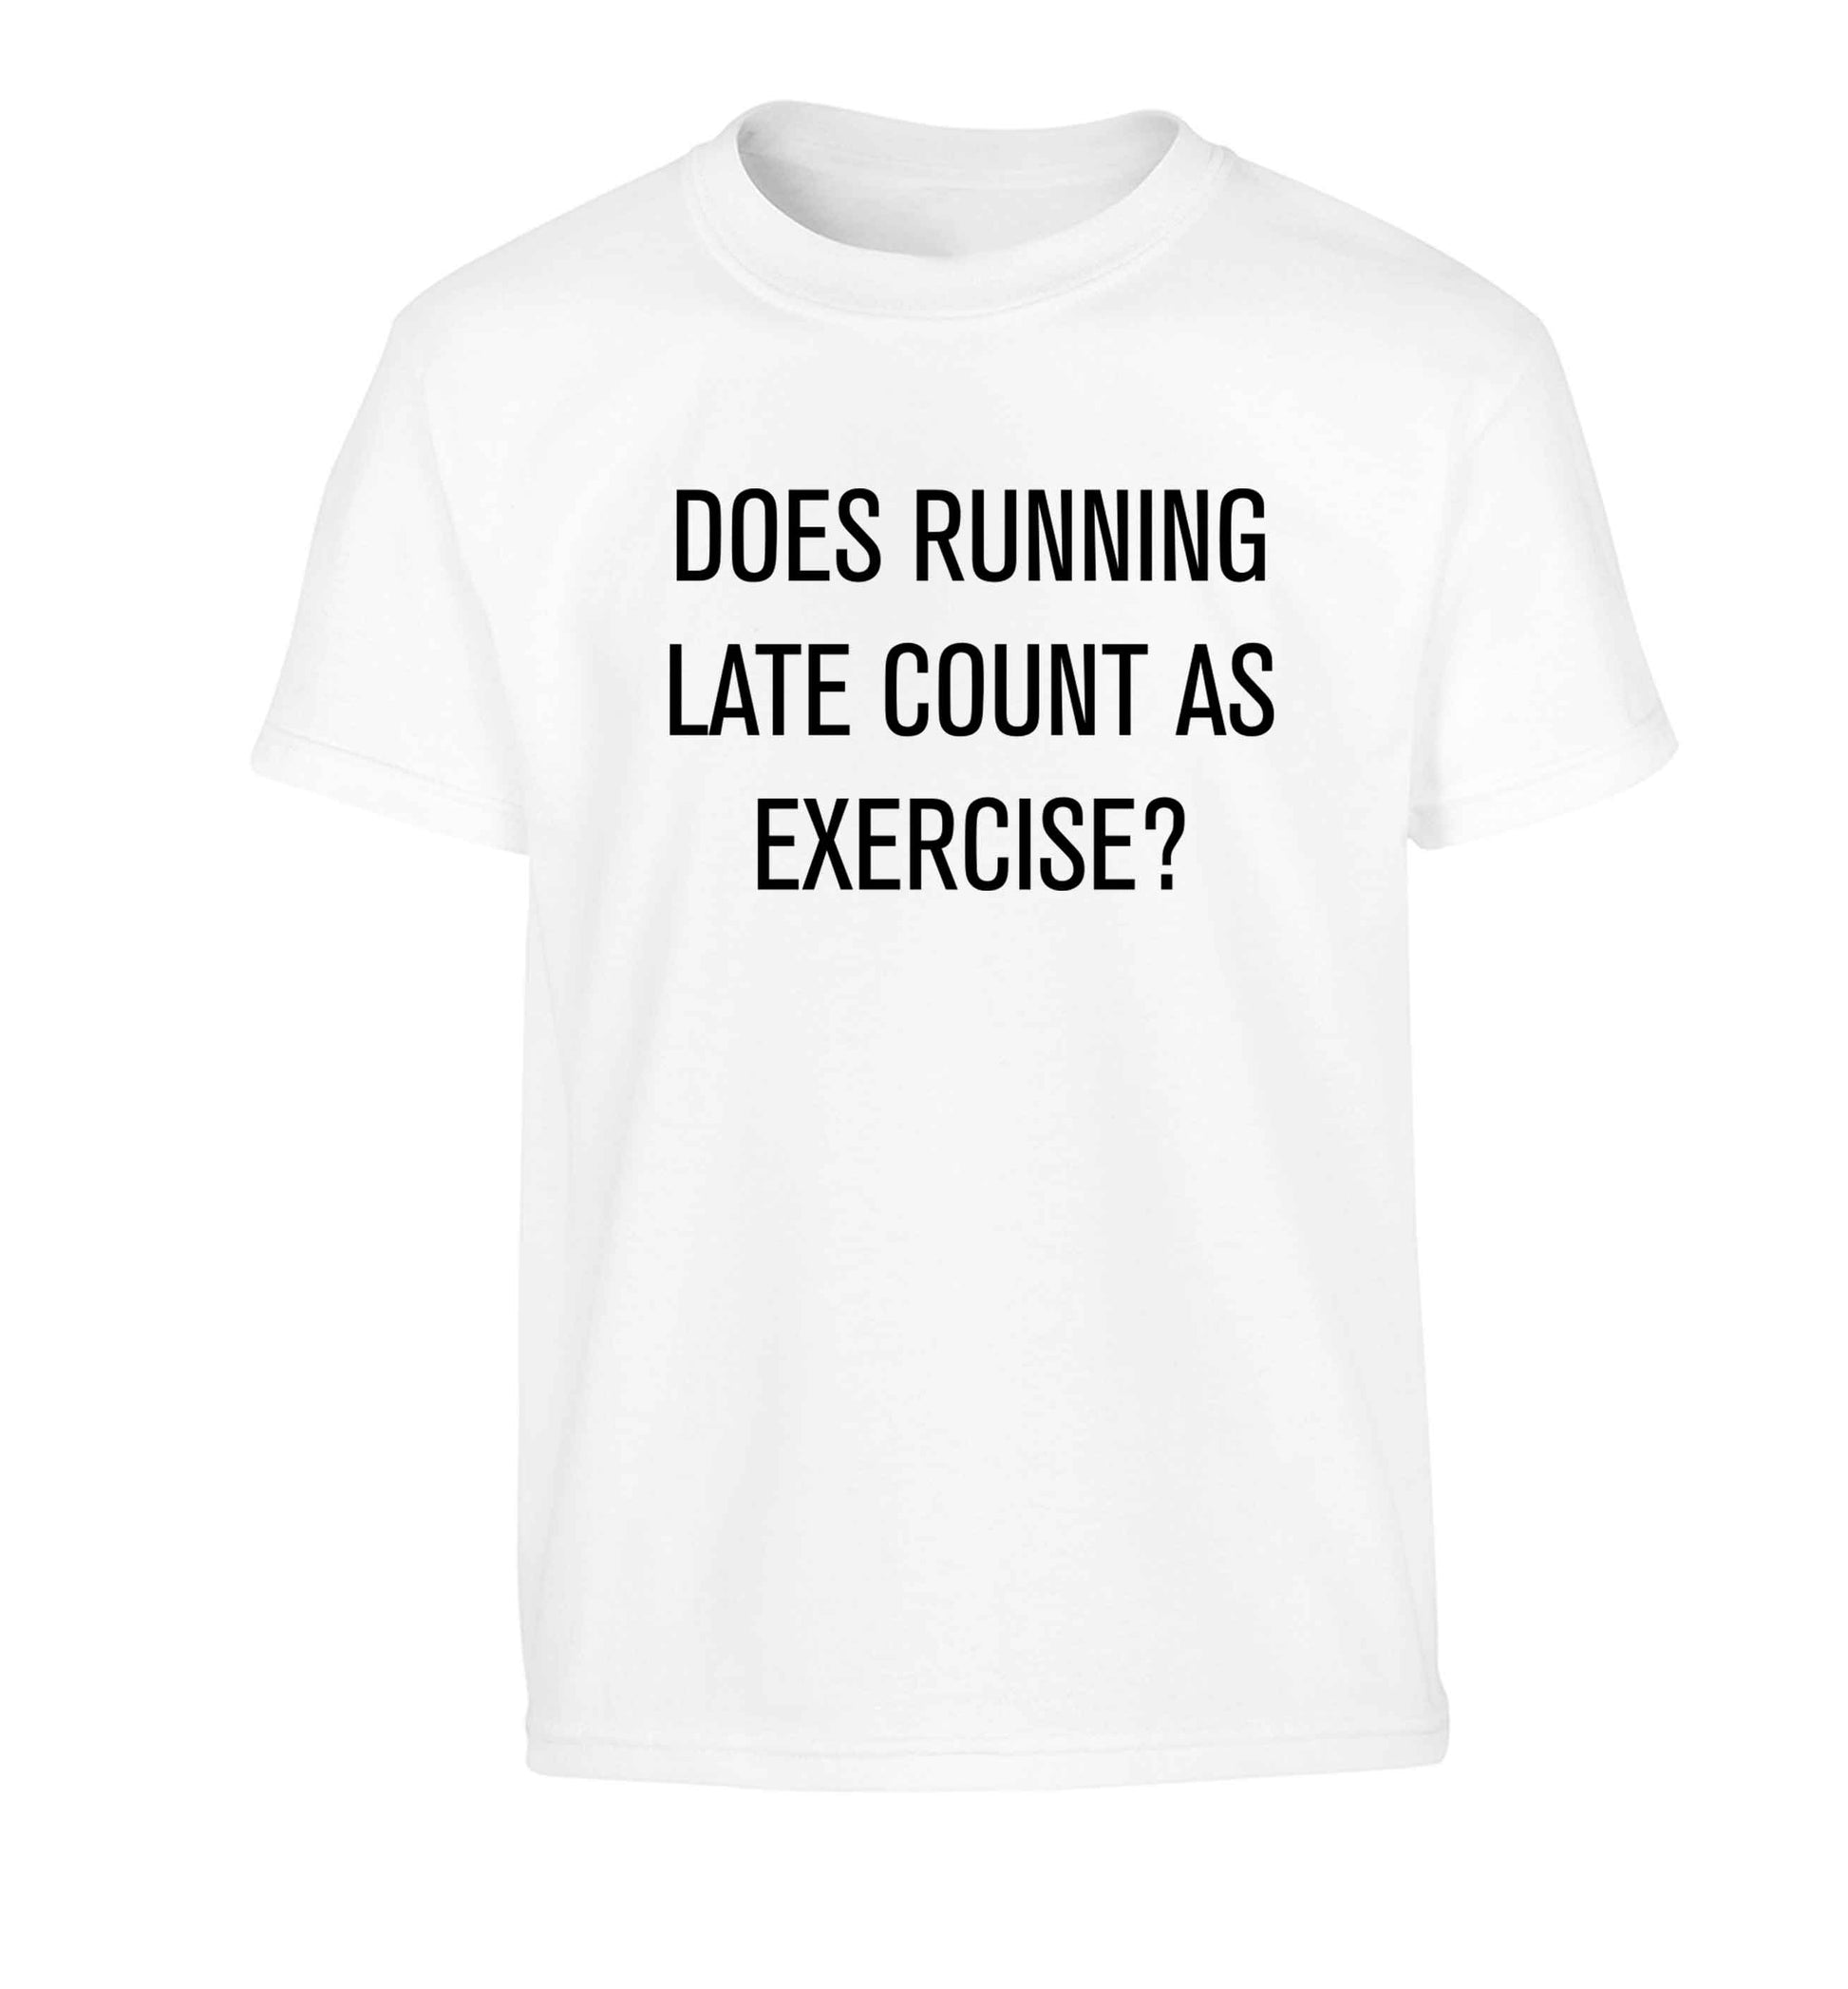 Does running late count as exercise? Children's white Tshirt 12-13 Years